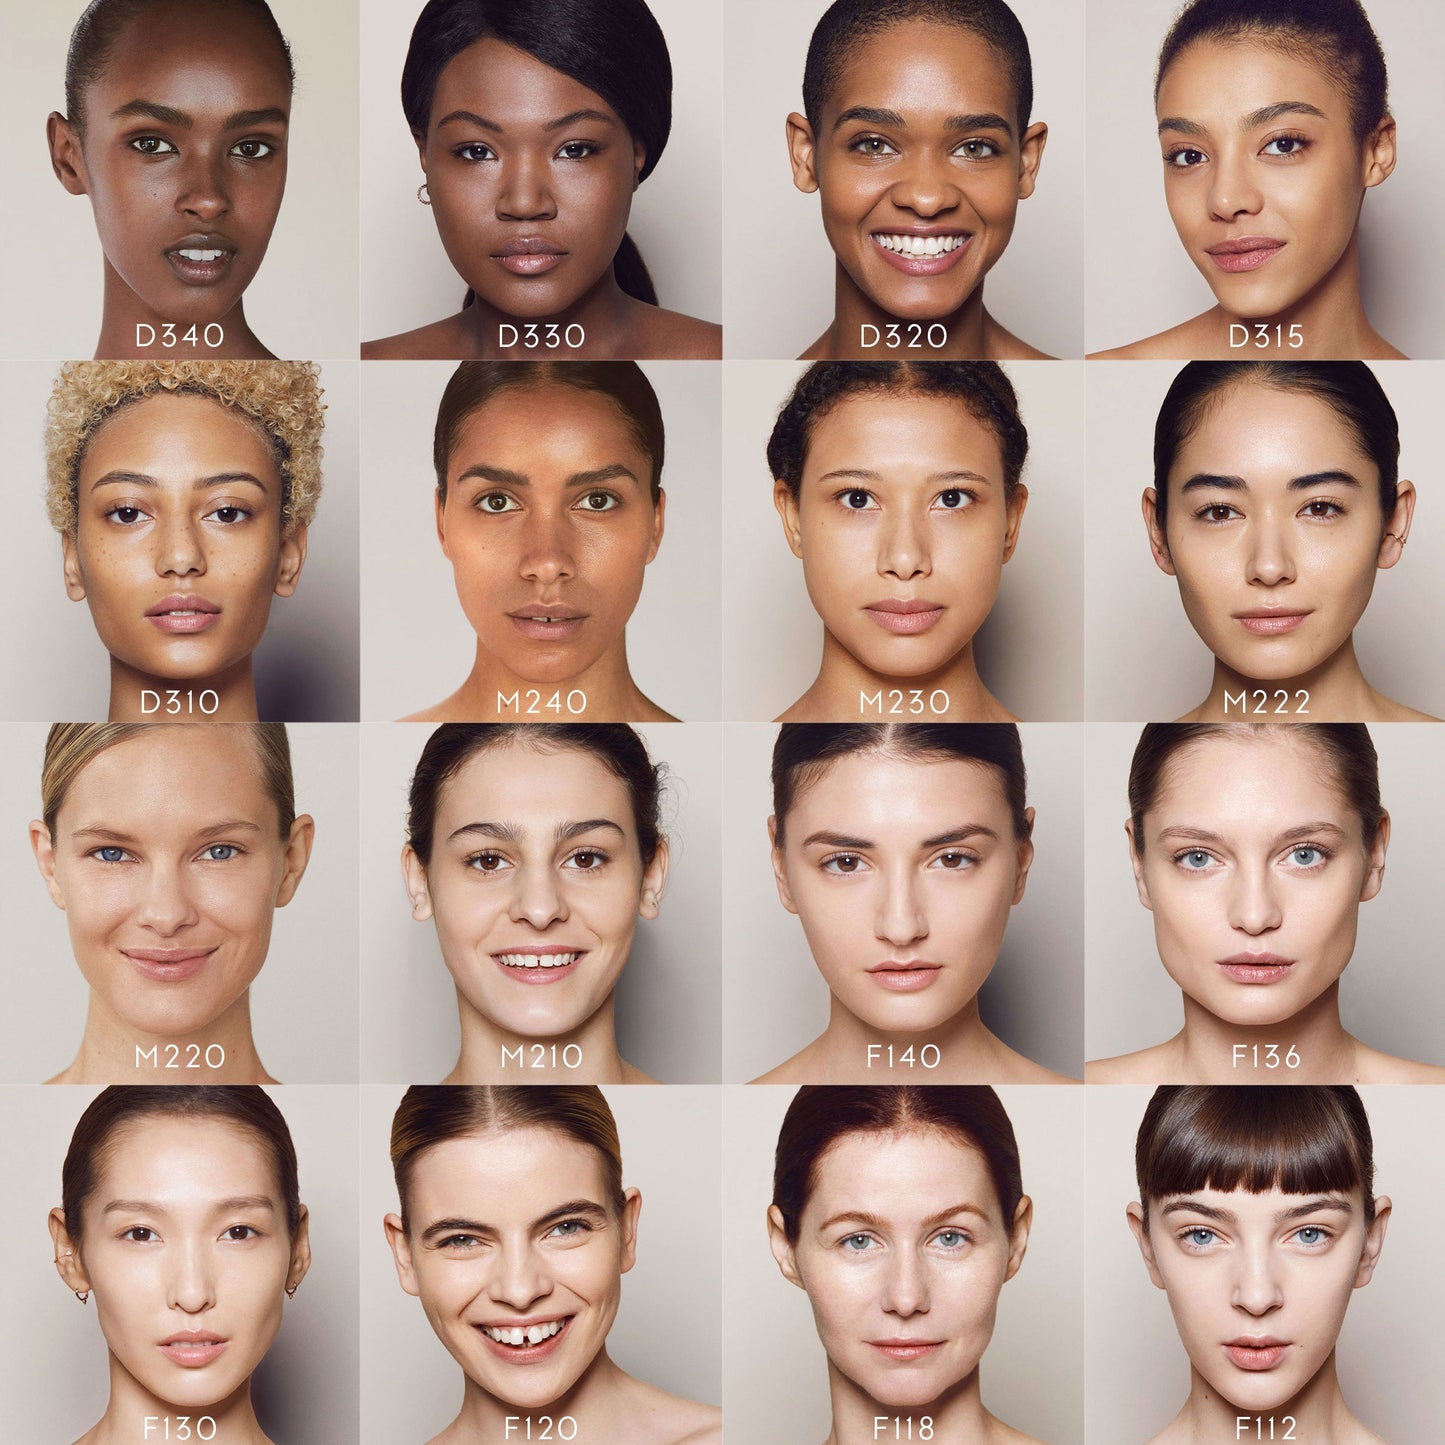 Close ups of various faces of different skin tones, from dark to light with the foundation shades they are wearing. D320 is the third-deepest shade shown. 